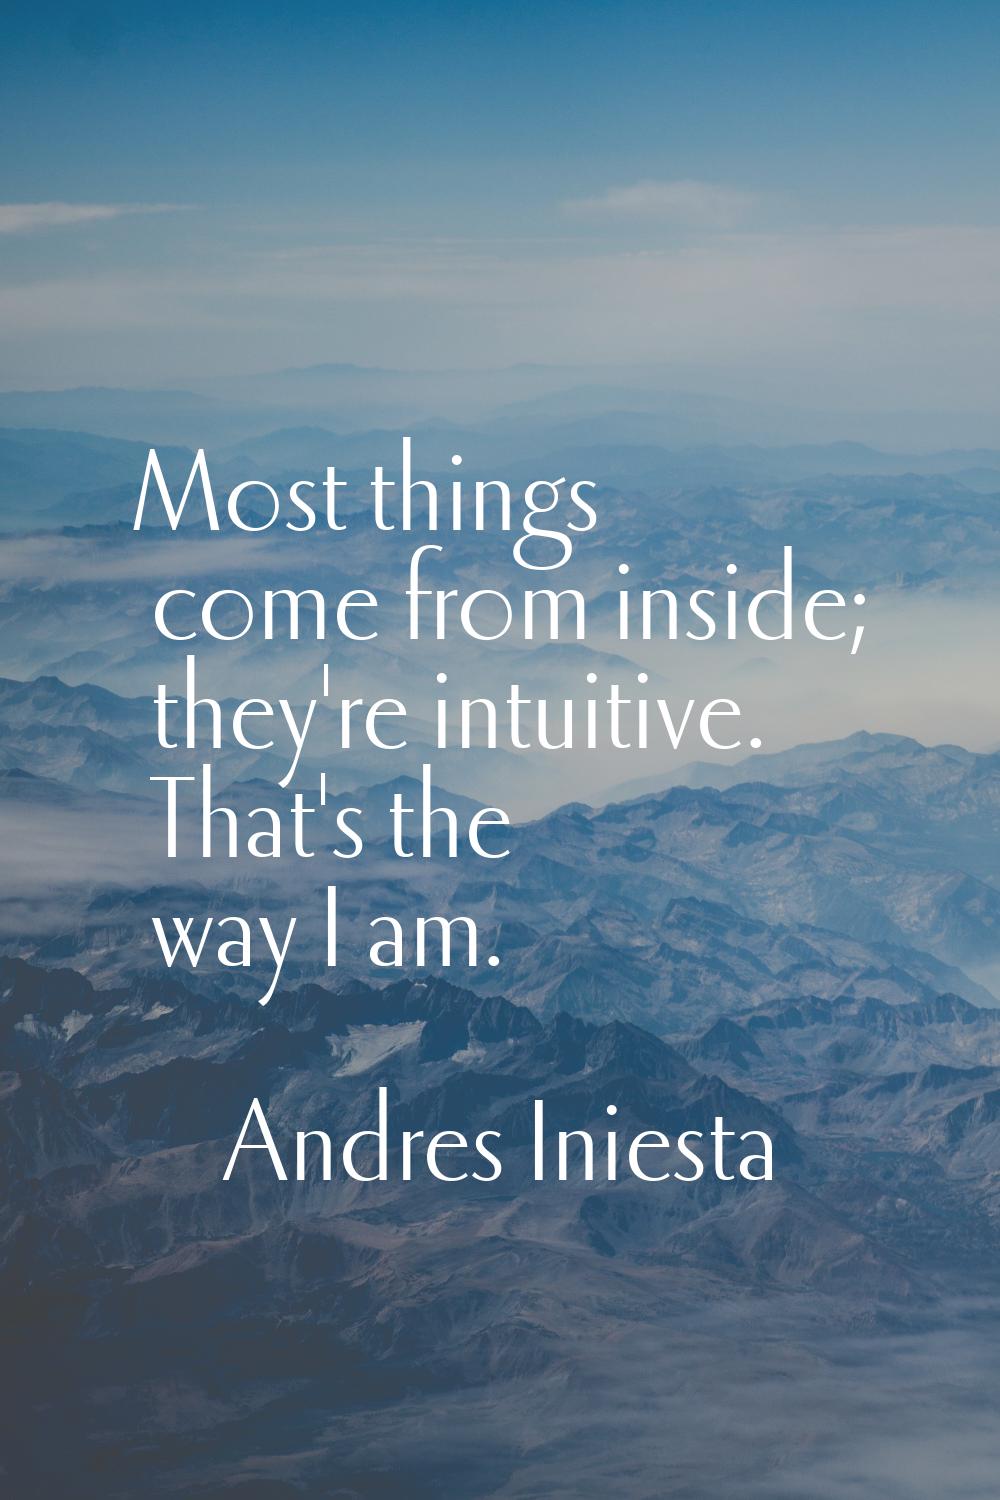 Most things come from inside; they're intuitive. That's the way I am.